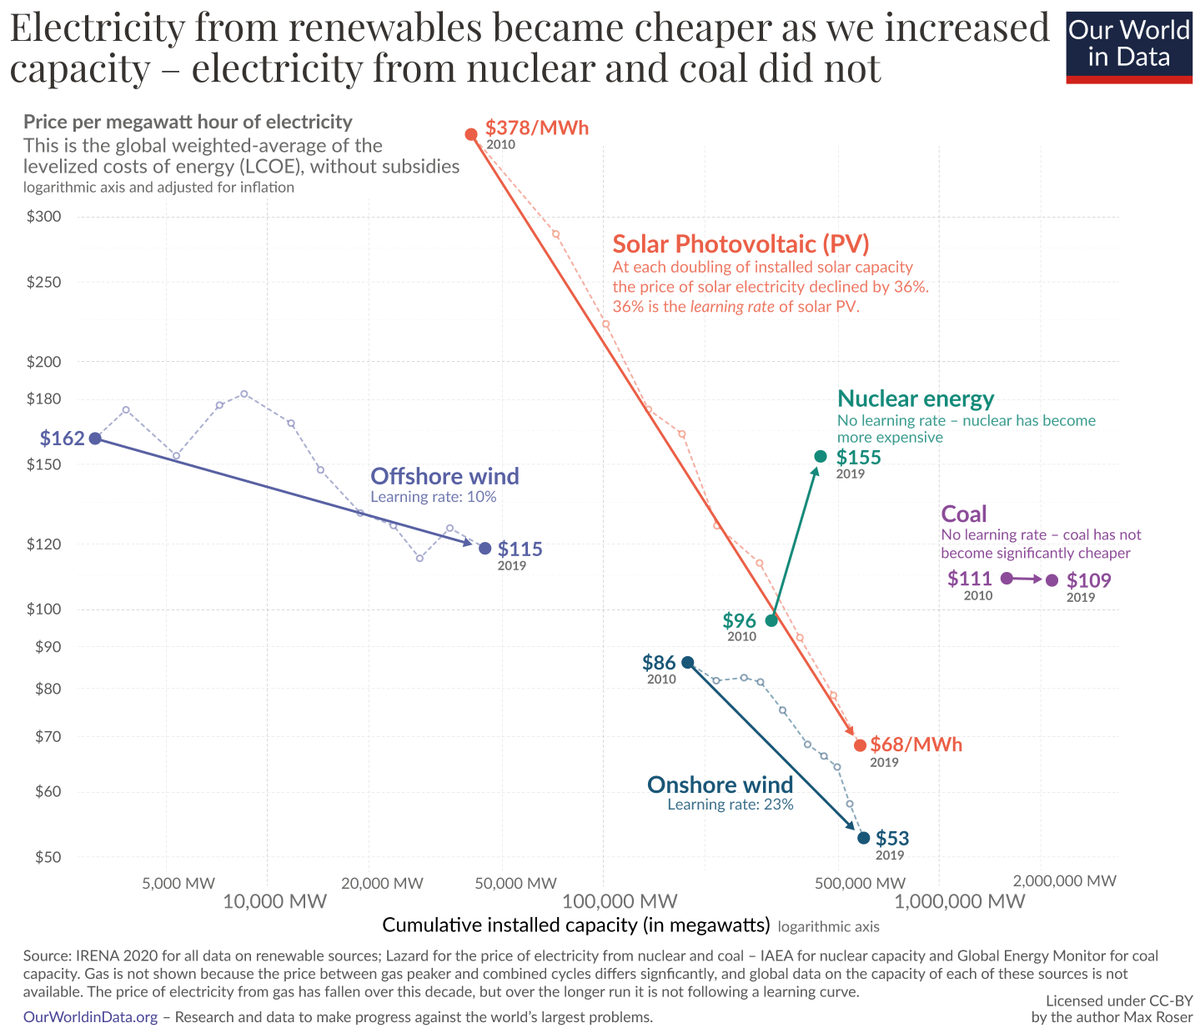 Yes, the prices of electricity from renewables also follow learning curves.This chart – the central chart of the text – shows that power from renewables get cheaper as we increase capacity. But this is not happening from power from fossil fuels and nuclear.